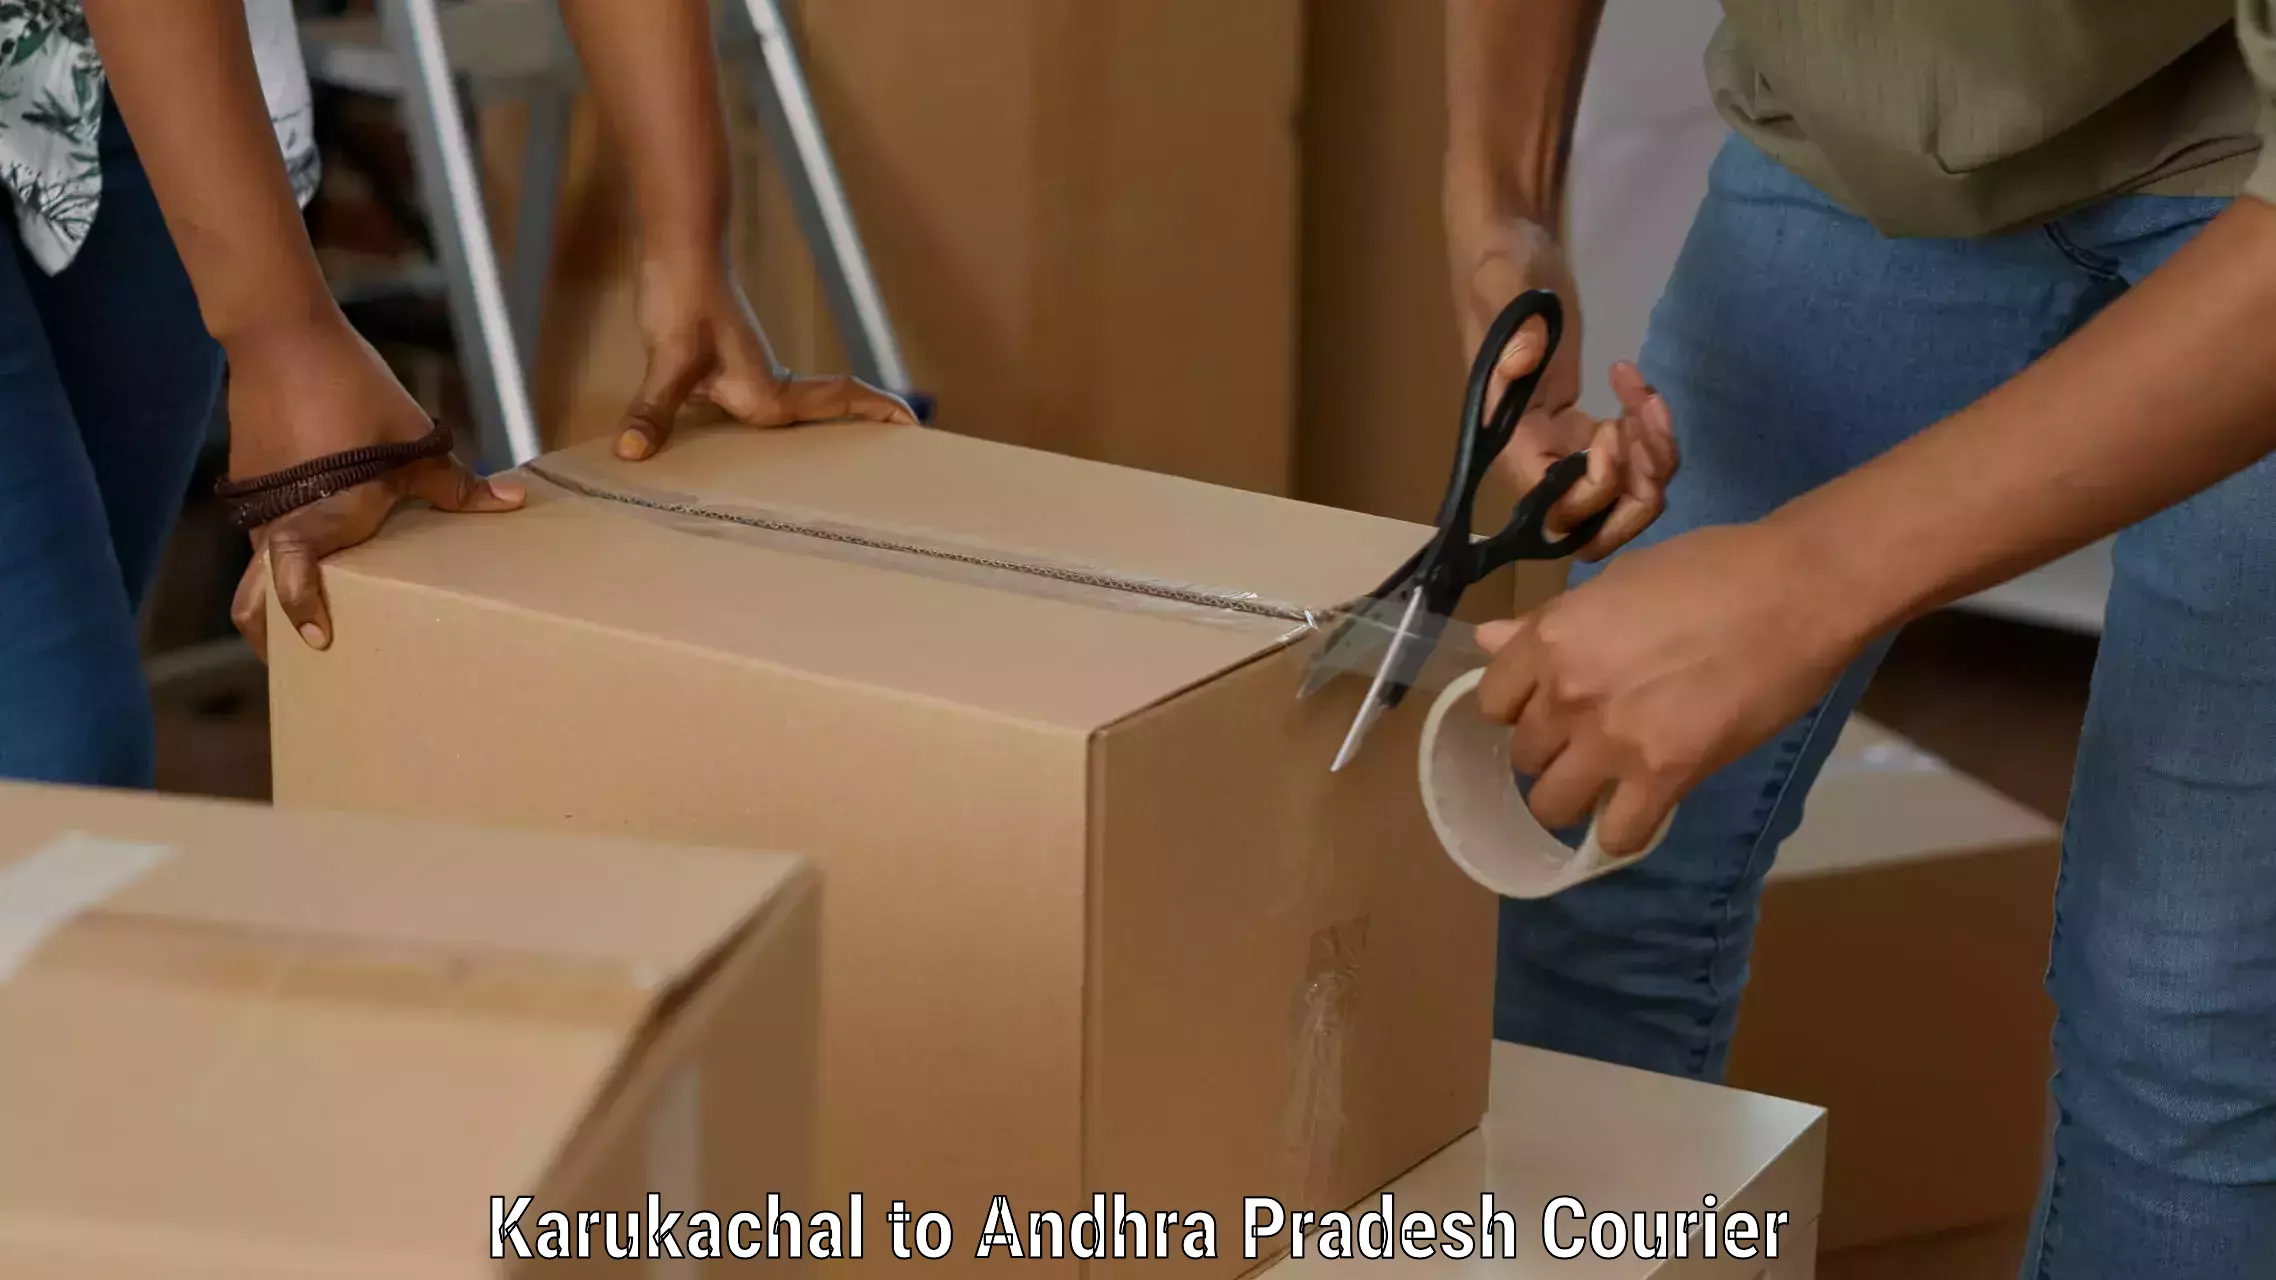 Quality courier services Karukachal to Sri City